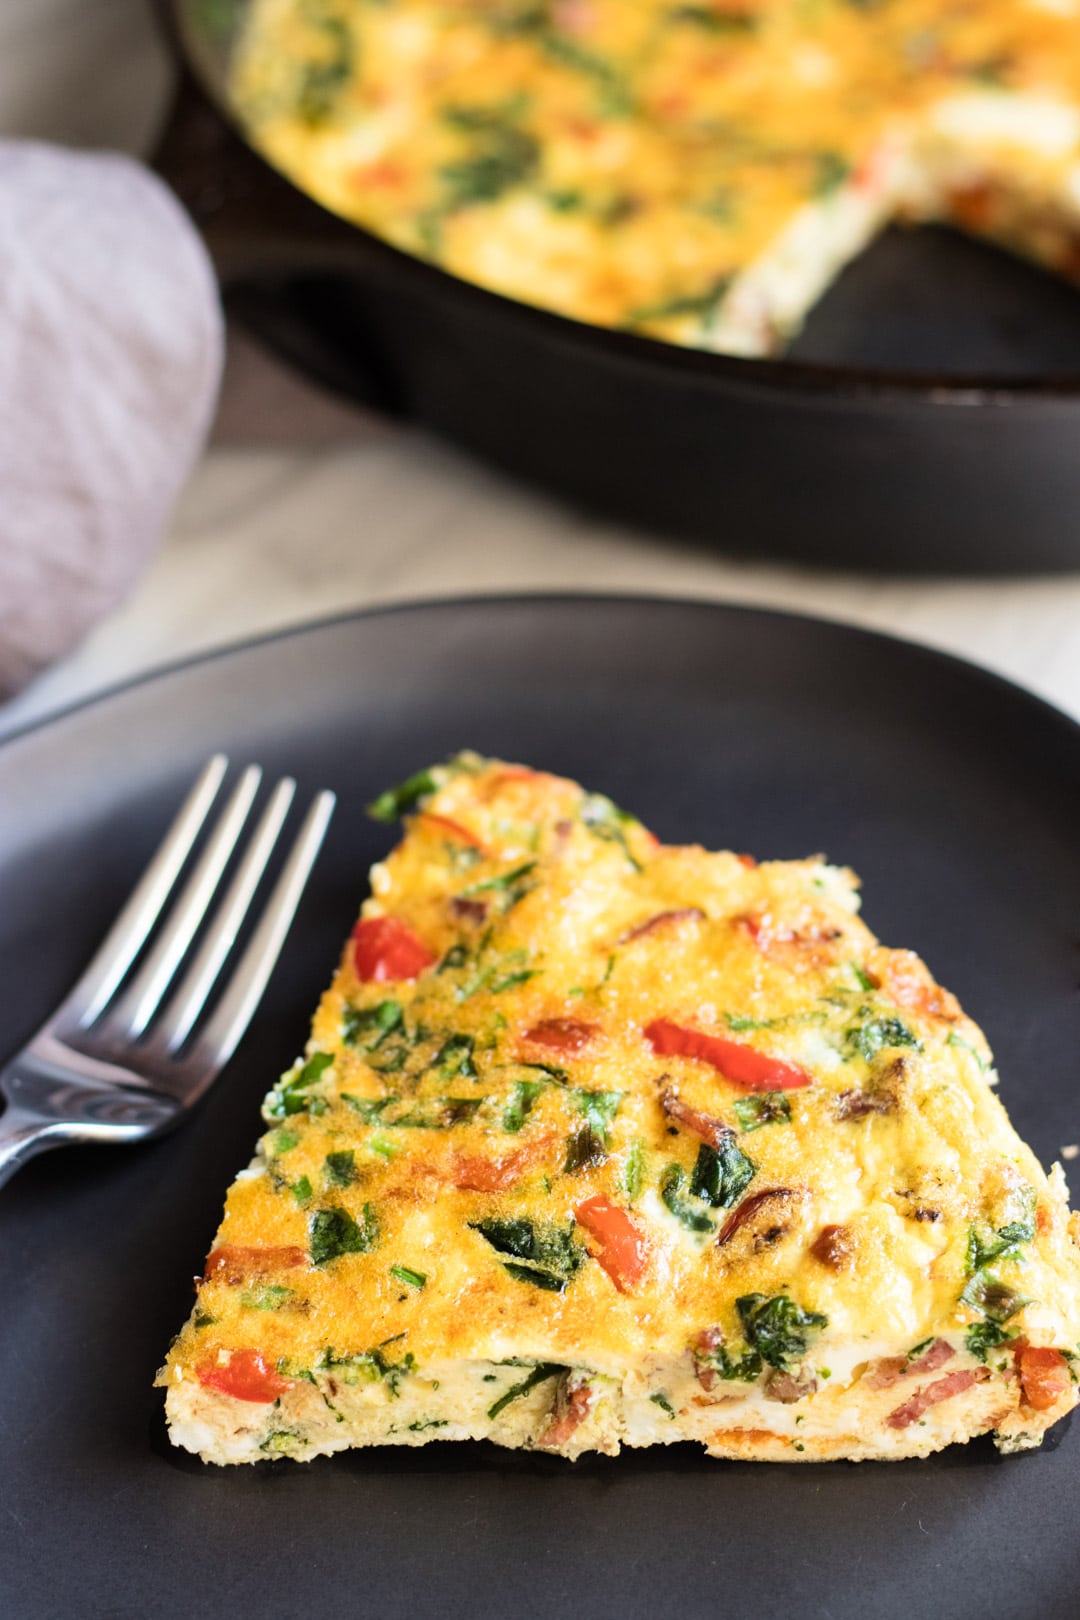 A slice of egg frittata dotted with red pepper, bacon, and green spinach sitting on a black plate with a fork.